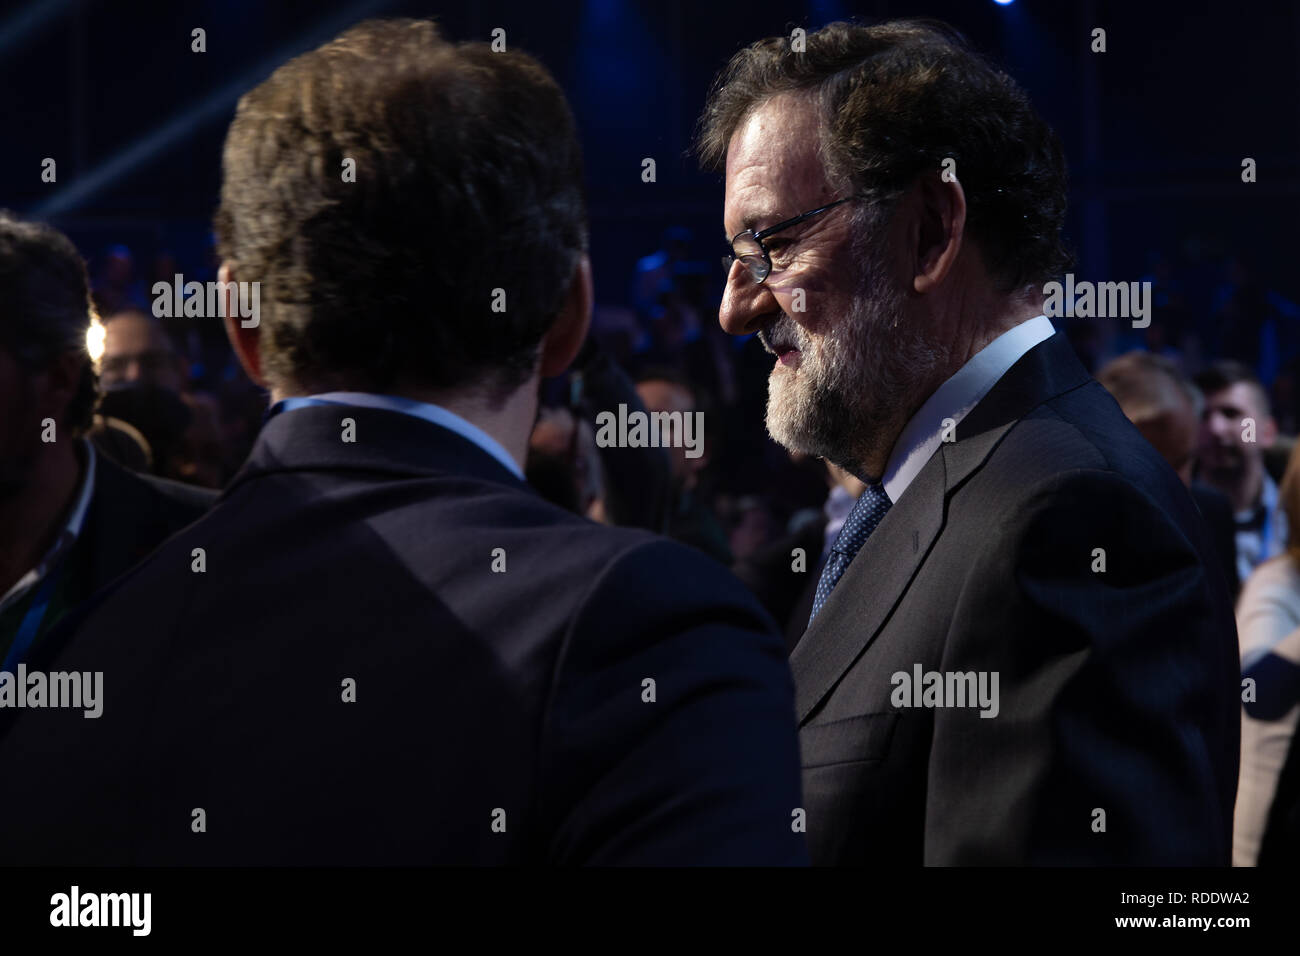 January 18, 2019 - Madrid, Spain - Mariano Rajoy speaking. The PP celebrates its national convention to establish the main lines of its electoral program for the three elections scheduled for May 26 and are key to gauge the leadership of the popular president, Pablo Casado. (Credit Image: © Jesus Hellin/ZUMA Wire) Stock Photo